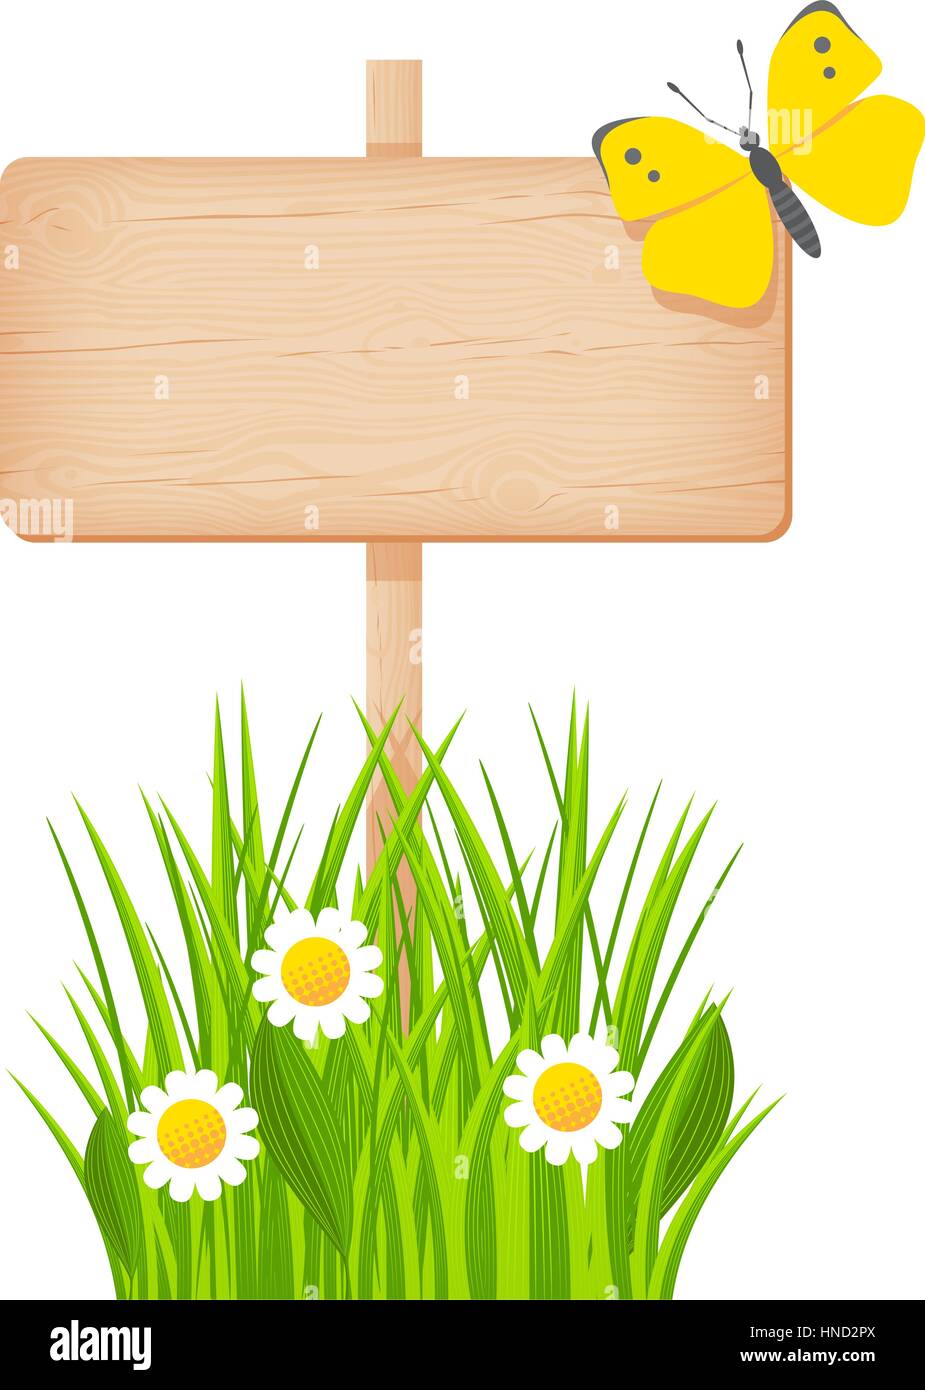 Wooden rectangular signboard with knots and cracks on a pole at the grass lawn with flowers and butterfly vector illustration Stock Vector